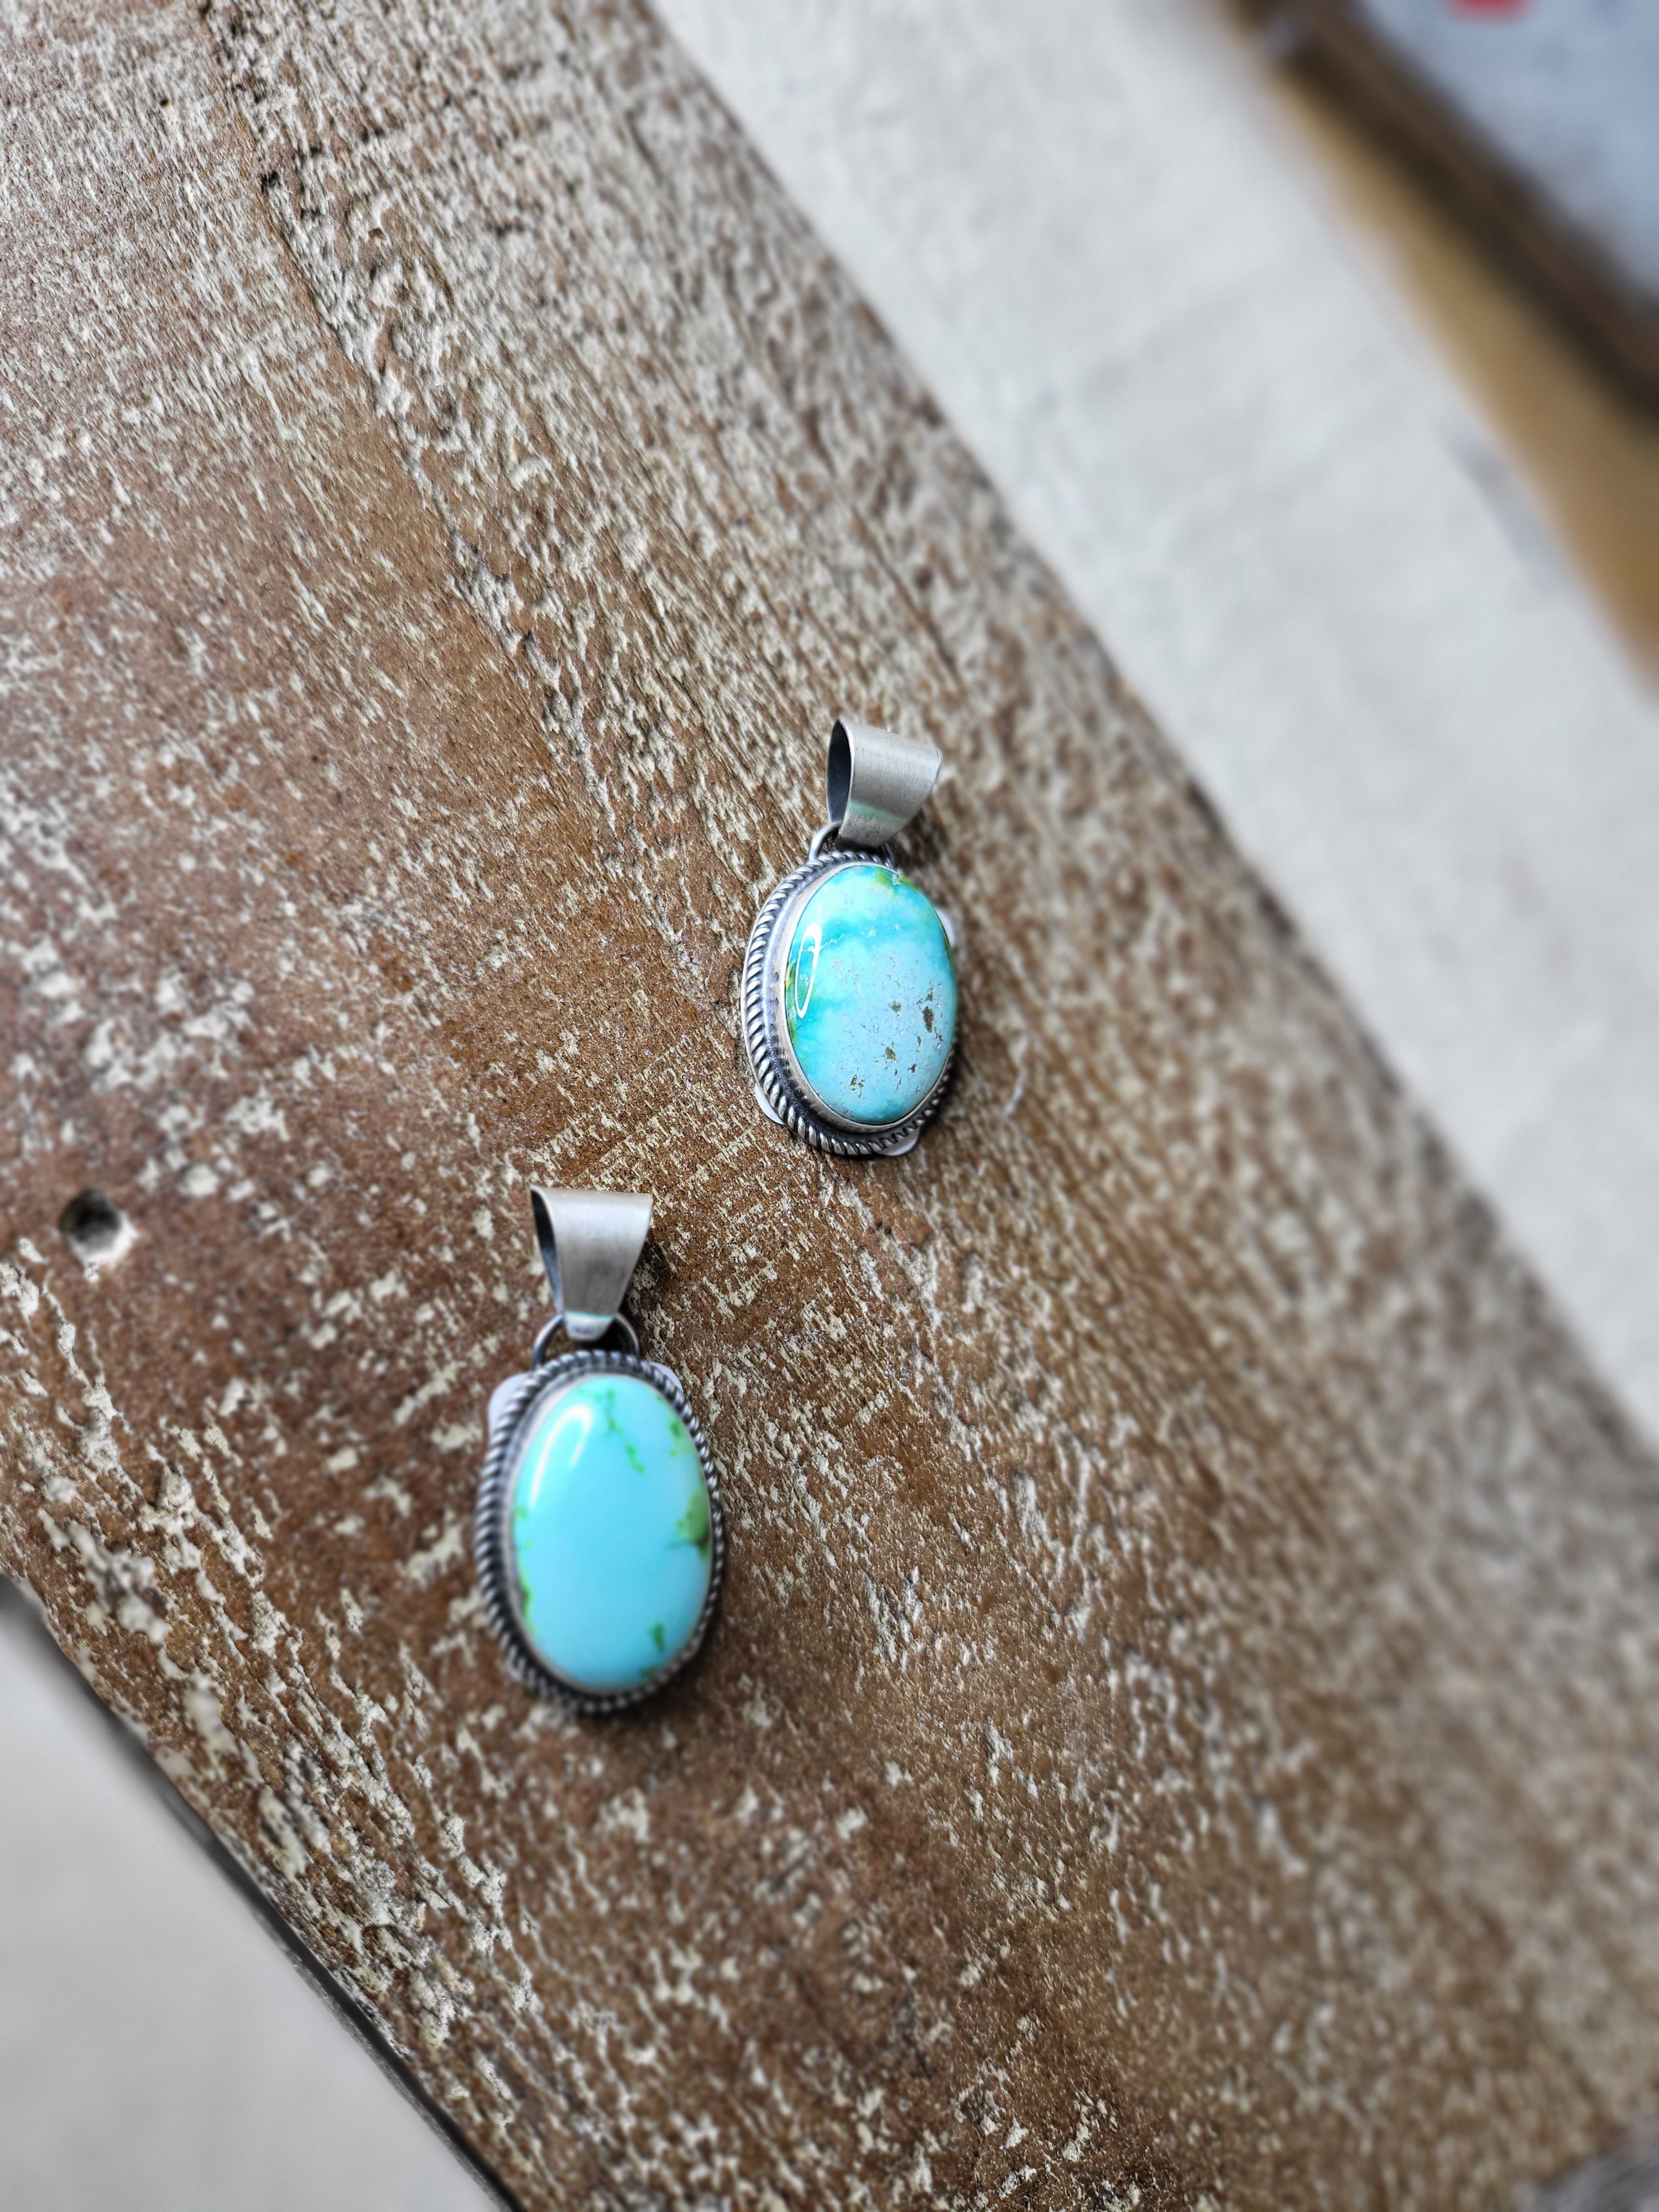 Genuine Turquoise Small Drop Necklace Charm